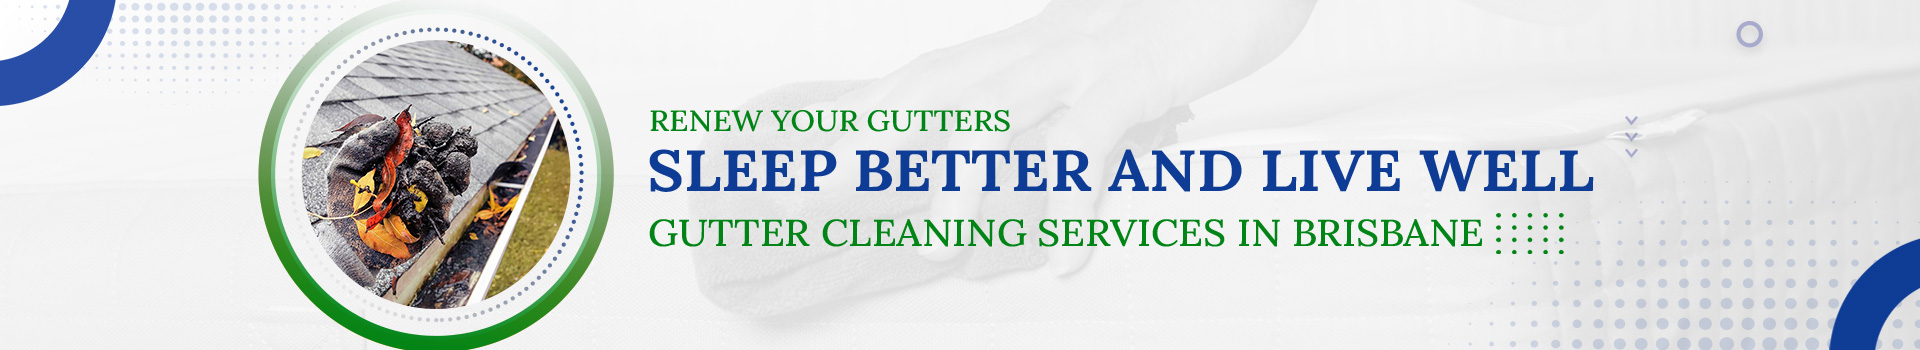 Gutter Cleaning services in Brisbane 1